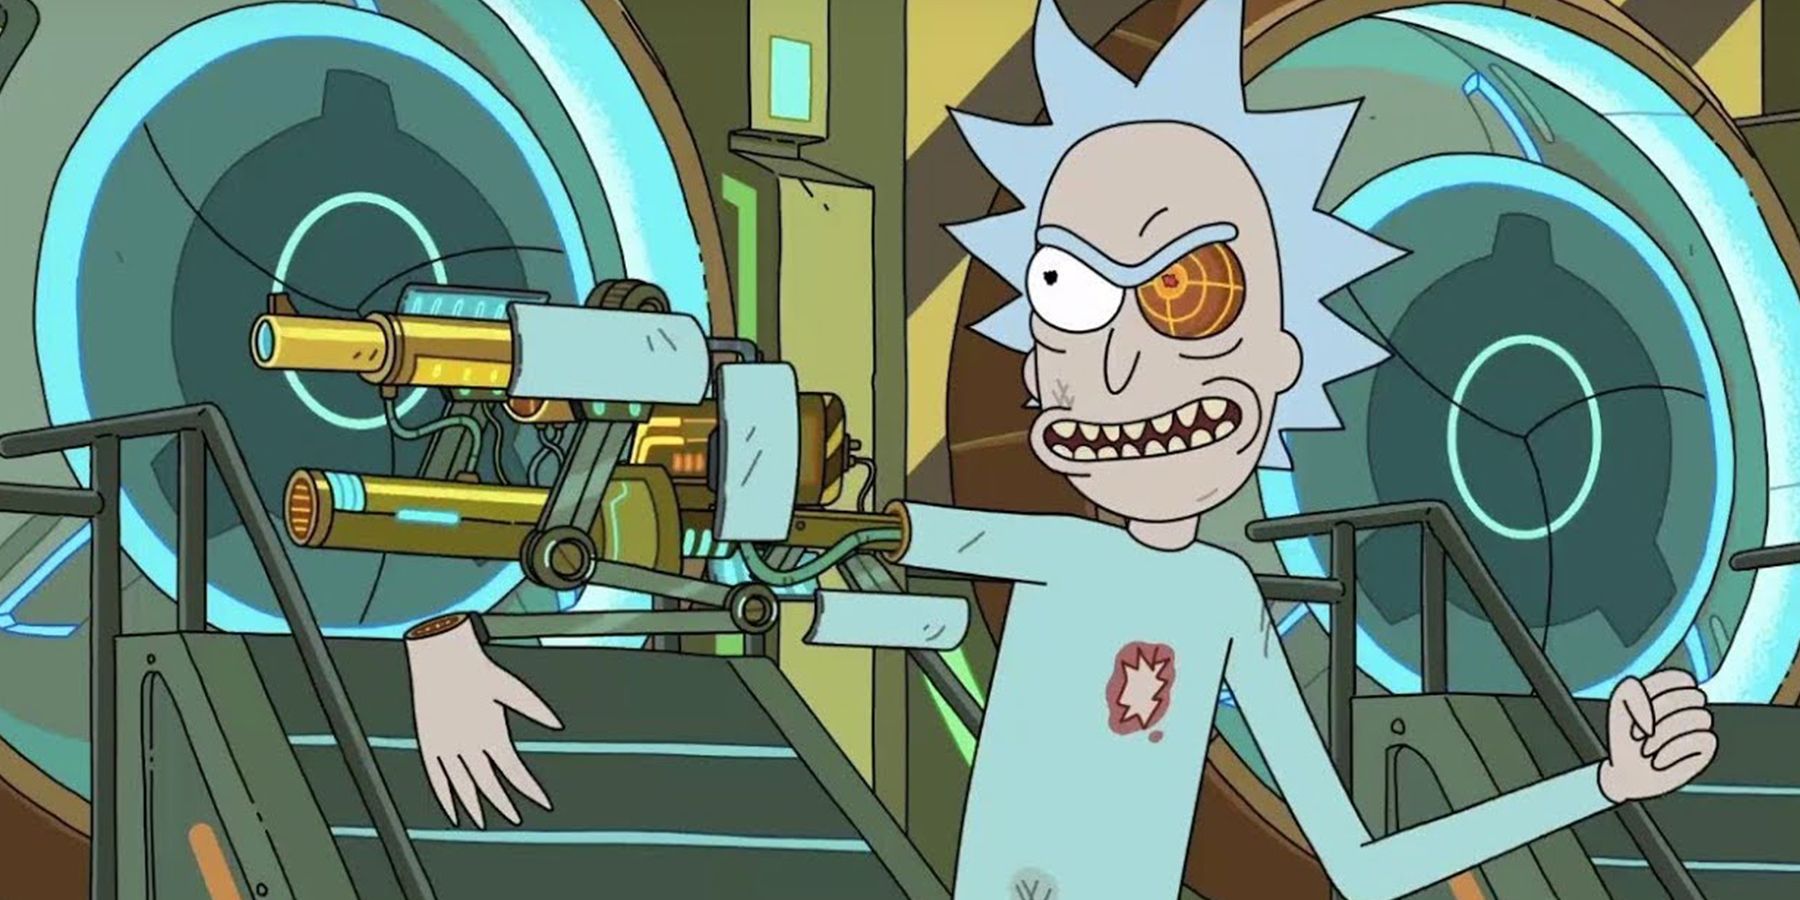 Cybernetic Rick Sanchez deploying a laser cannon in Rick & Morty